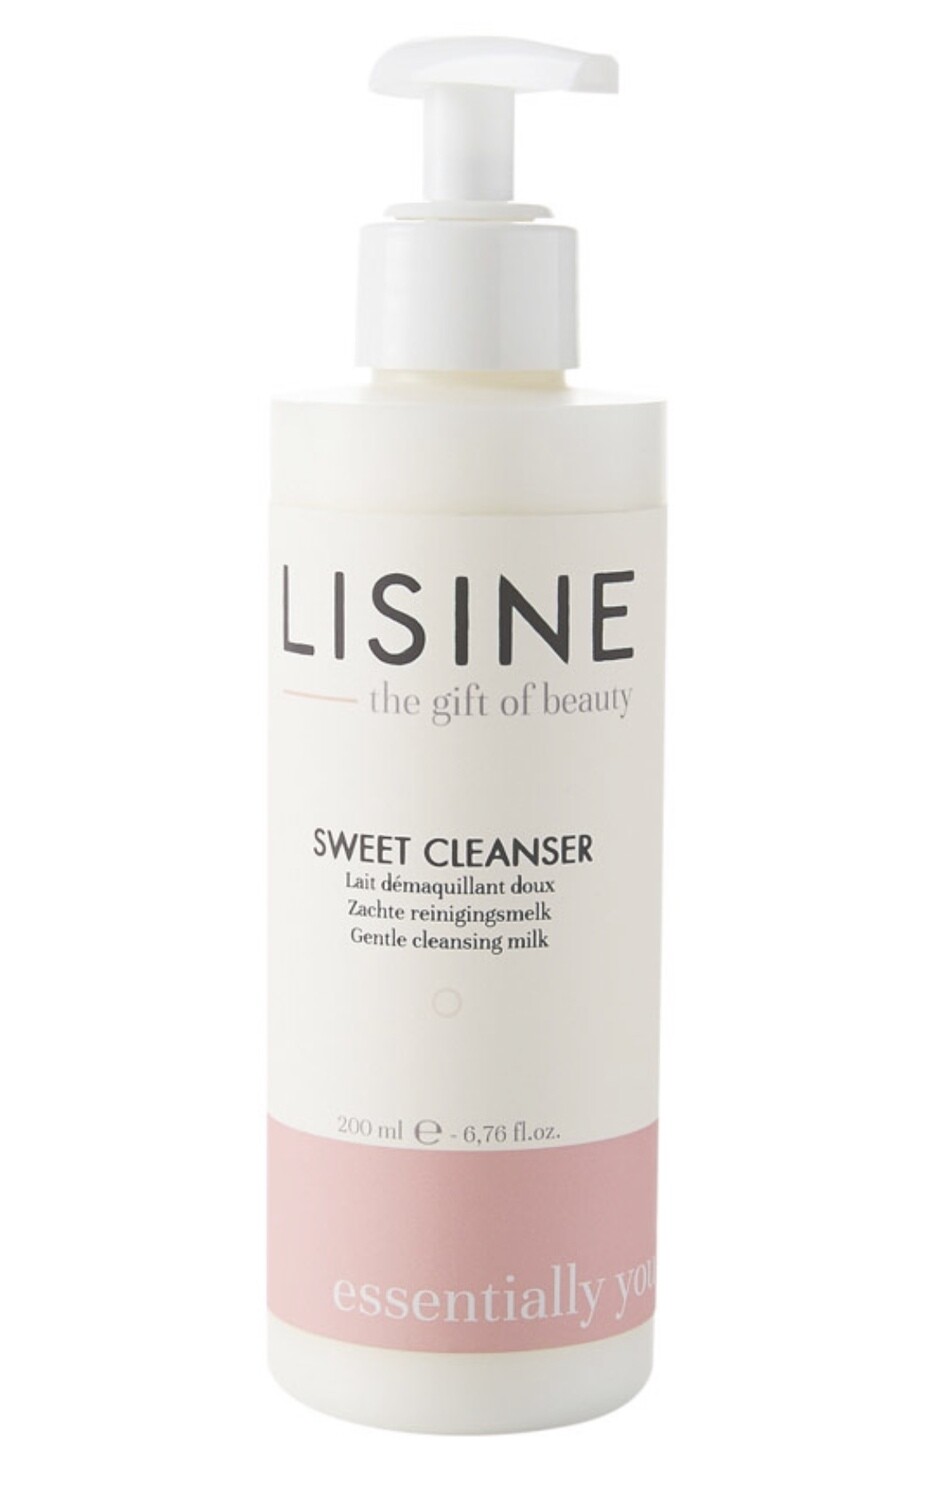 Sweet Cleanser